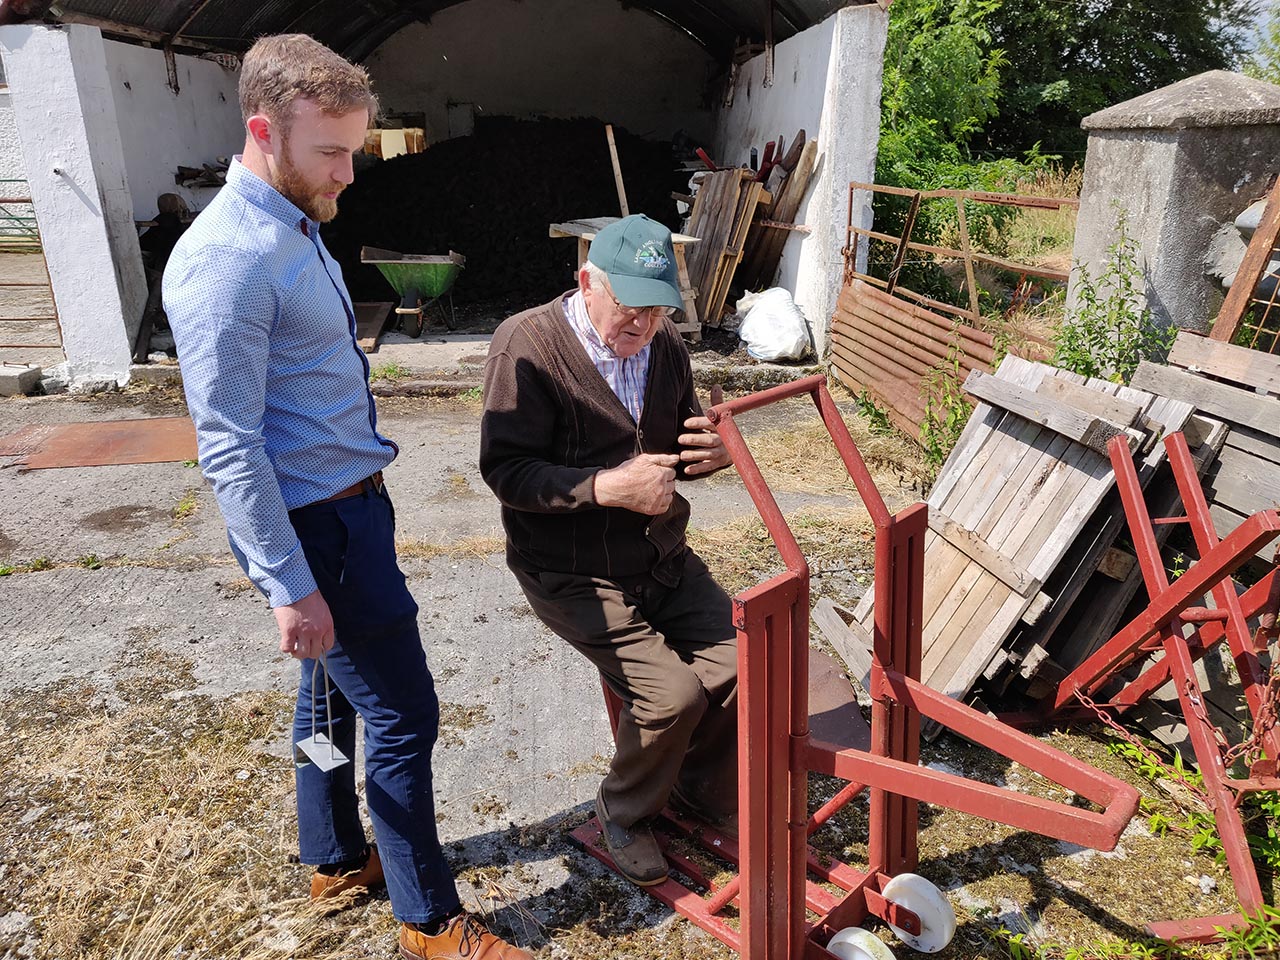 Tony Bergin and James Greevy (Herdwatch) reviewing an invention